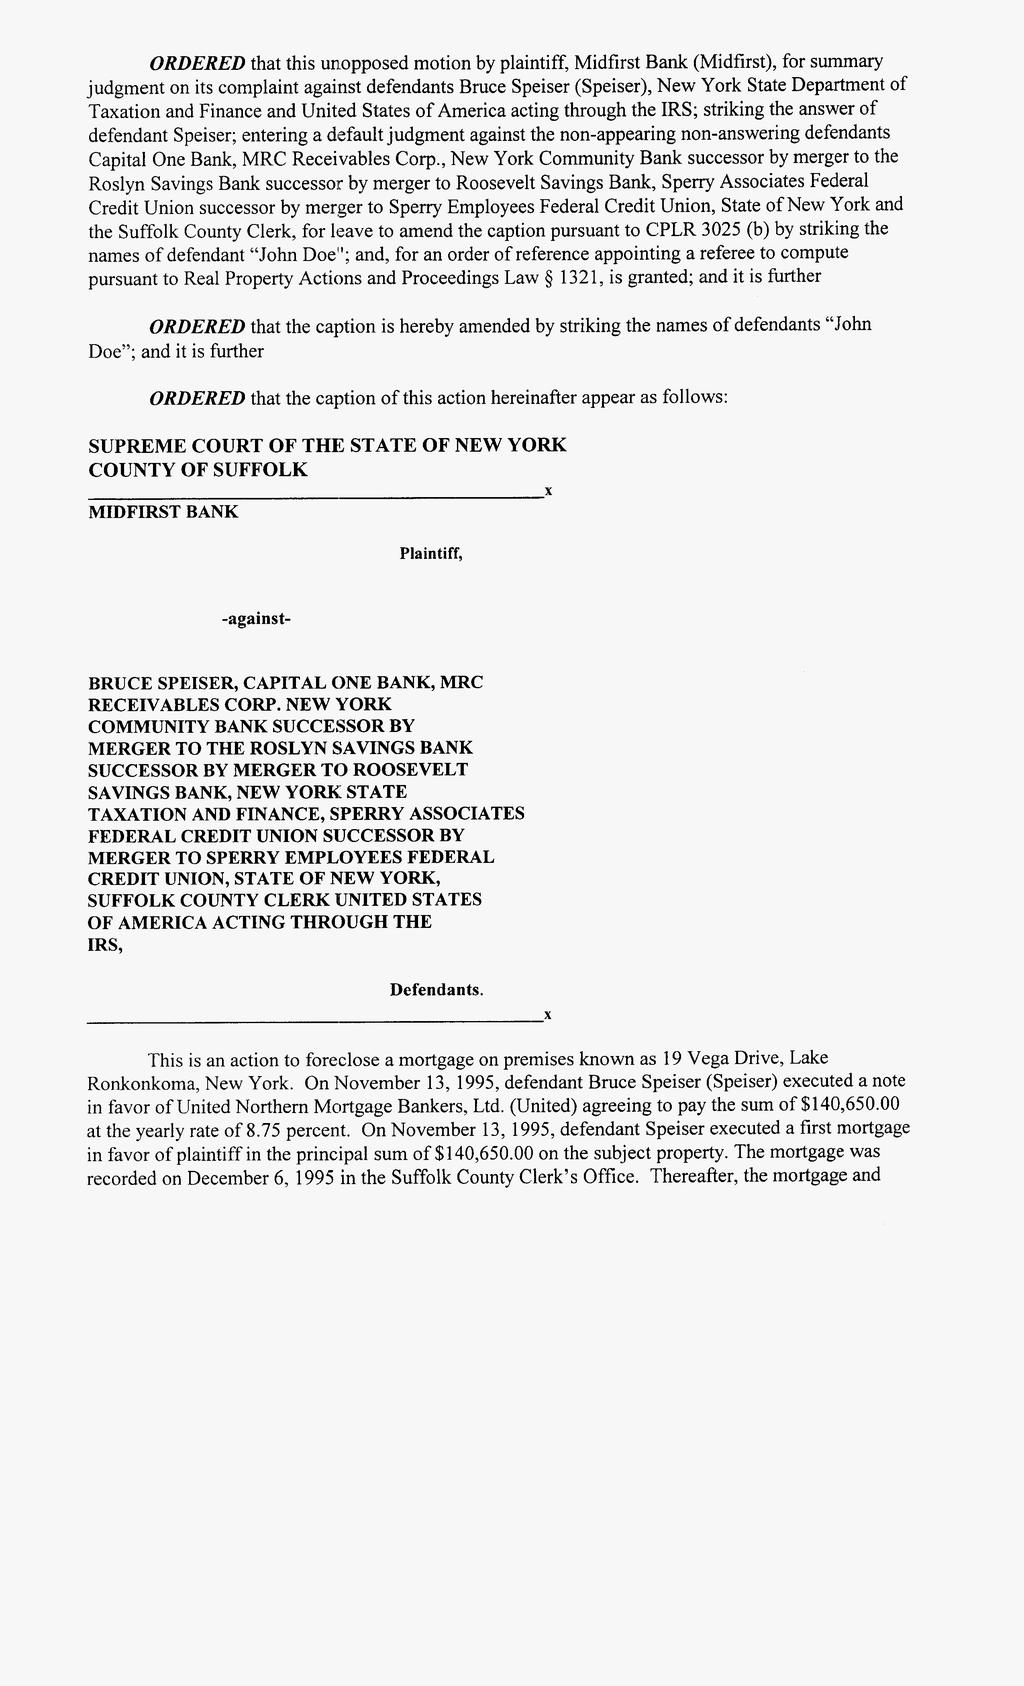 [* 2] ORDERED that this unopposed motion by plaintiff, Midfirst Bank (Midfirst), for summary judgment on its complaint against defendants Bruce Speiser (Speiser), New York State Department of